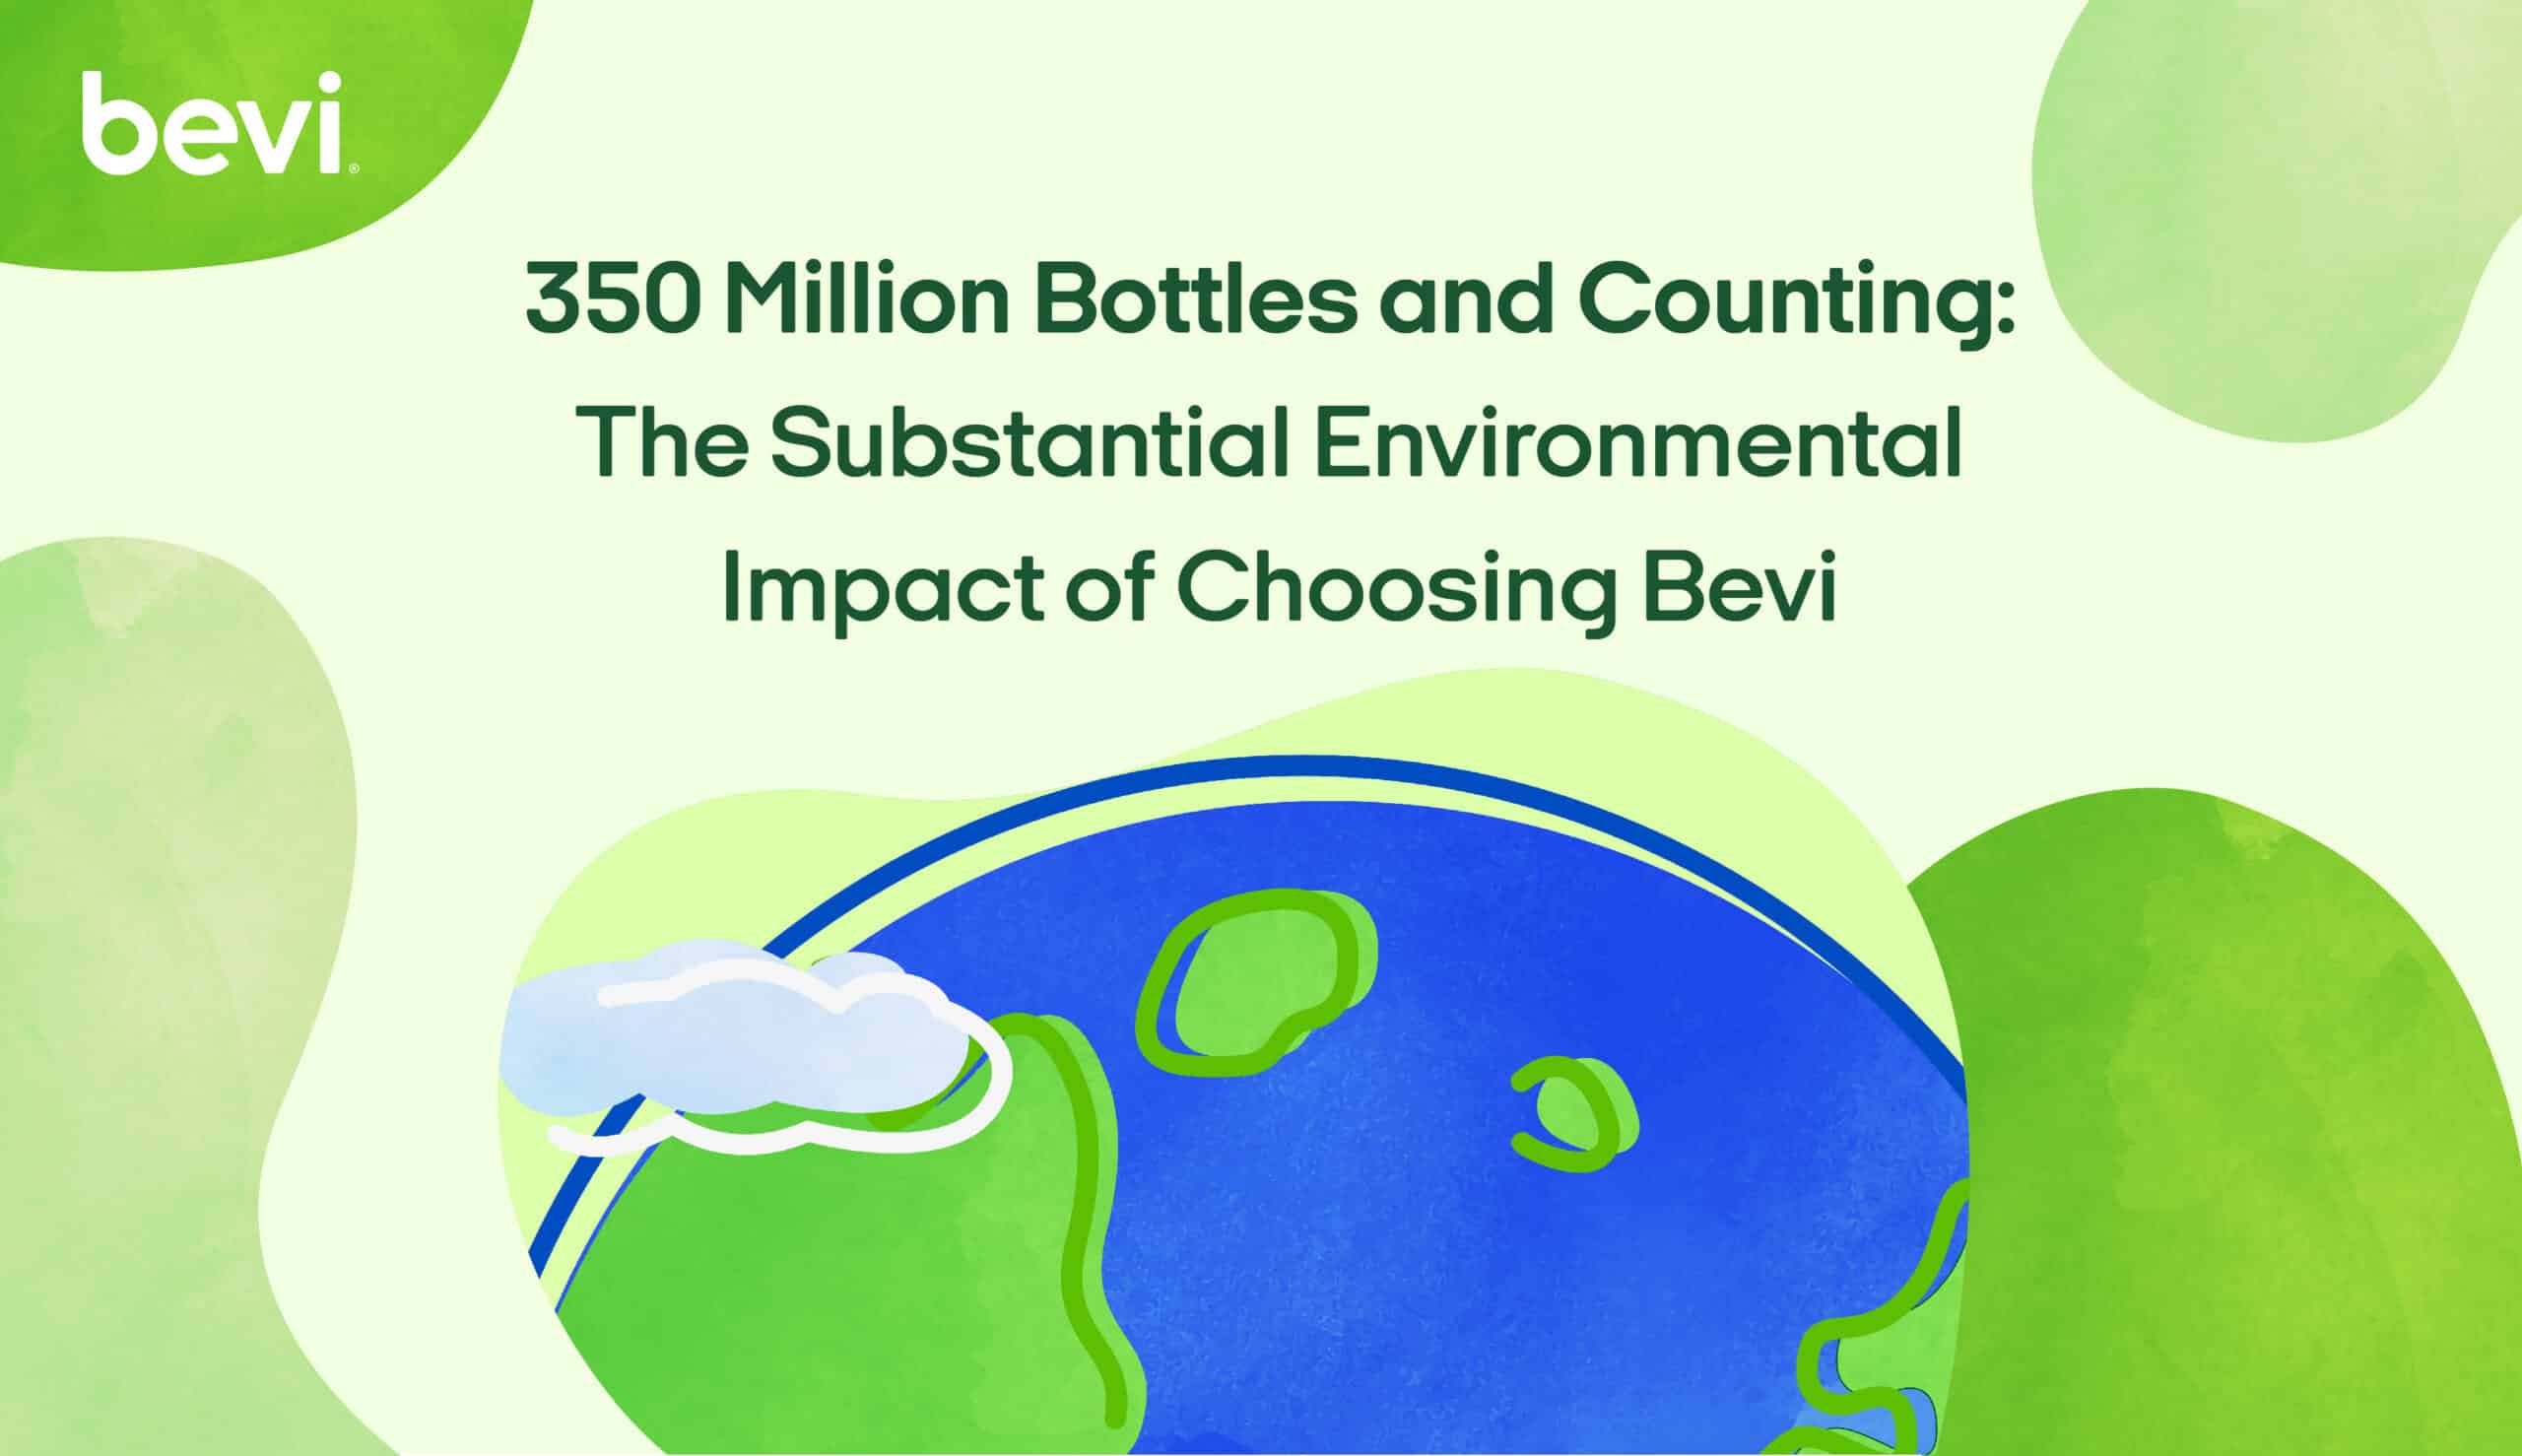 350 Million Bottles and Counting: The Substantial Environmental Impact of Choosing Bevi